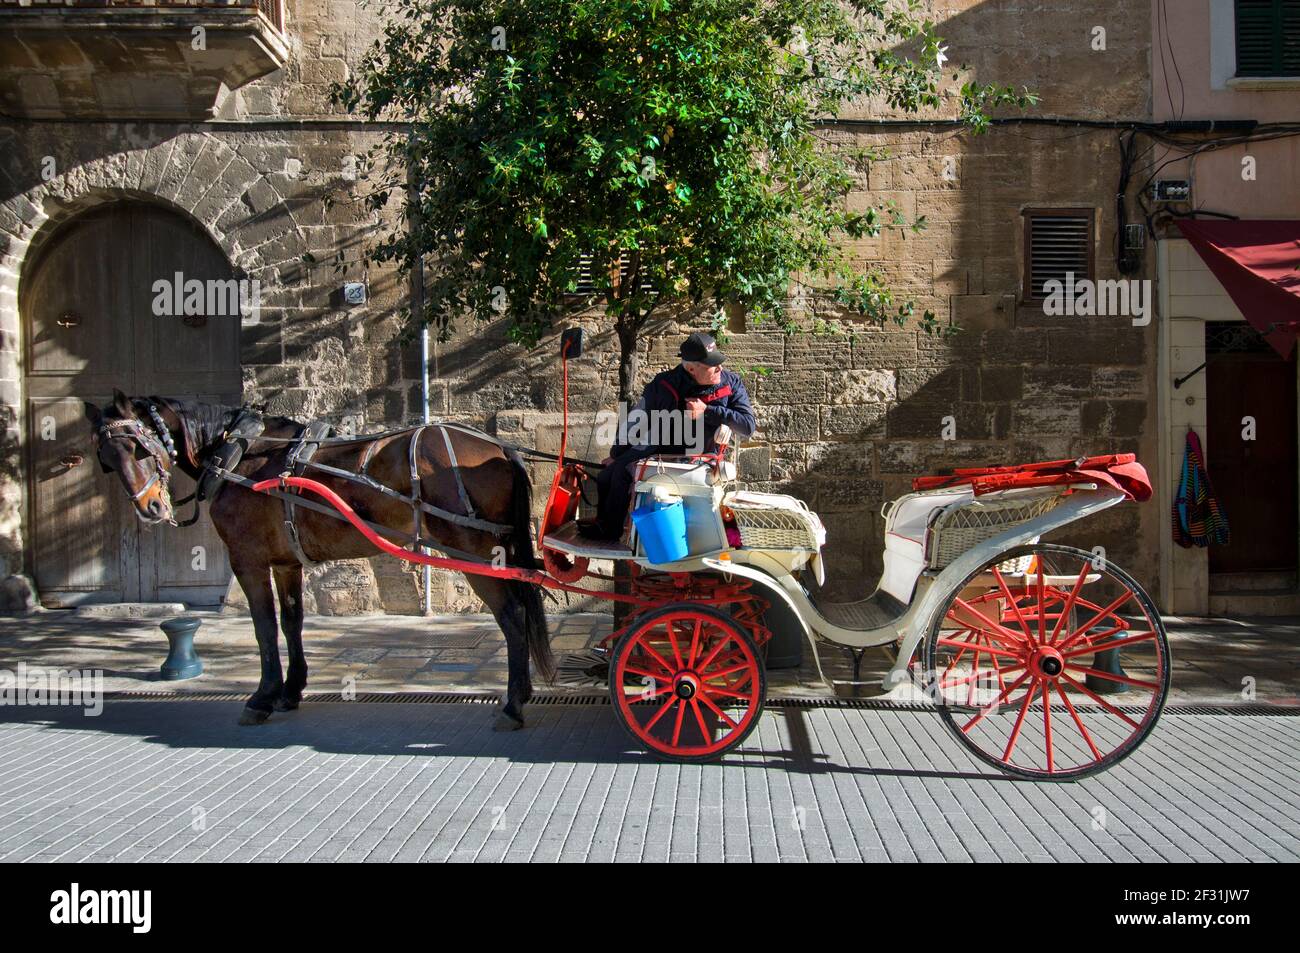 TOURISM SPAIN QUIET EMPTY Horse and carriage & driver in quiet street Mallorca waiting for tourists tourism Spain Concept Conceptual Covid Virus pandemic Europe Visitors Travel Vacation Visitors Economic catastrophe Spain Stock Photo